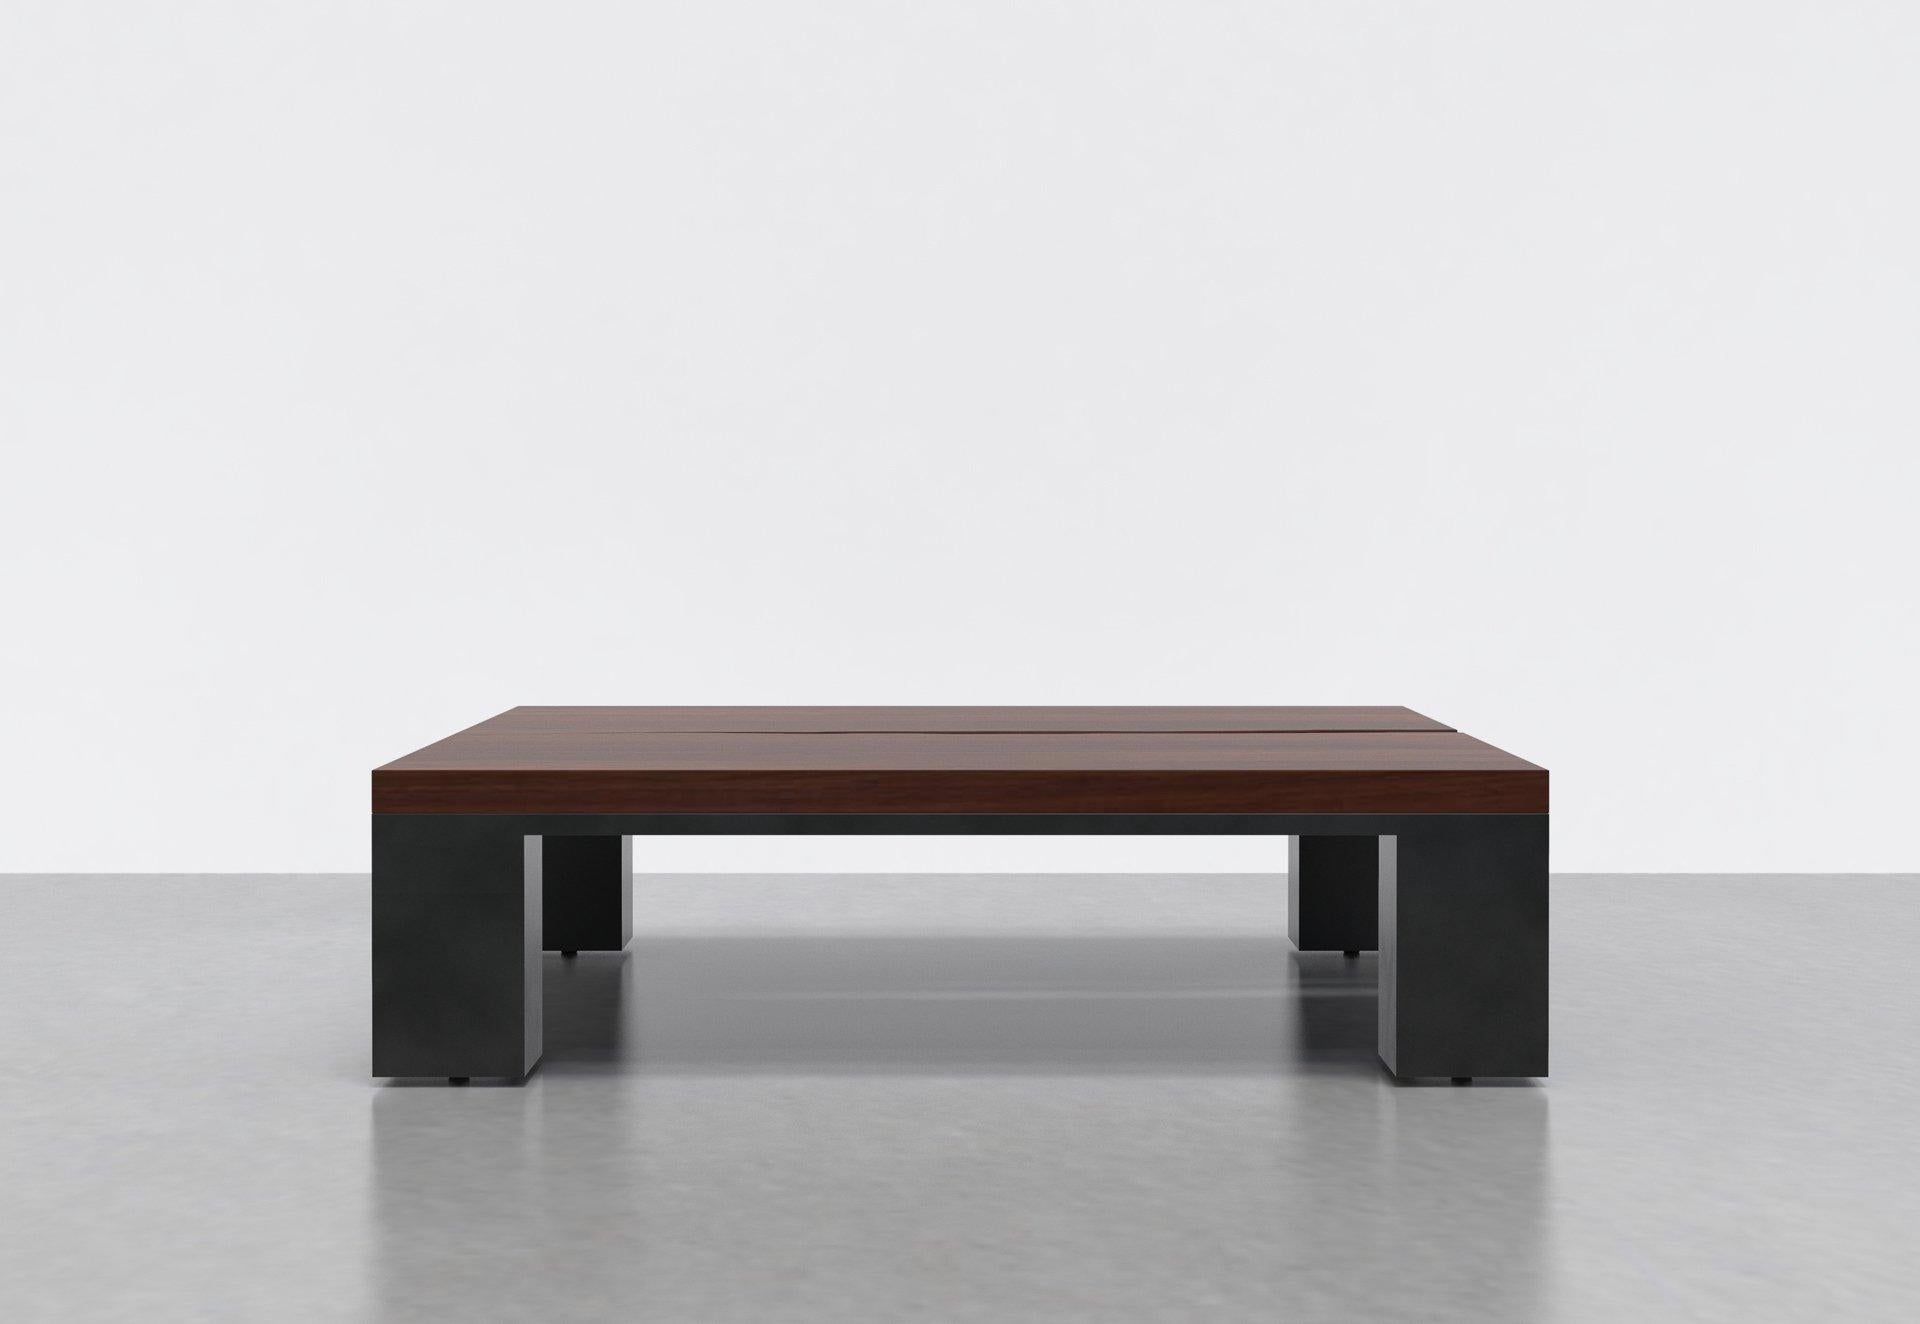 The Kong Coffee table is created from a solid wood top in a walnut finish, set on a steel frame. Its visual balance of form and weight creates a dynamic contrast with the organic edge detail towards the center of the table top. The Kong Coffee